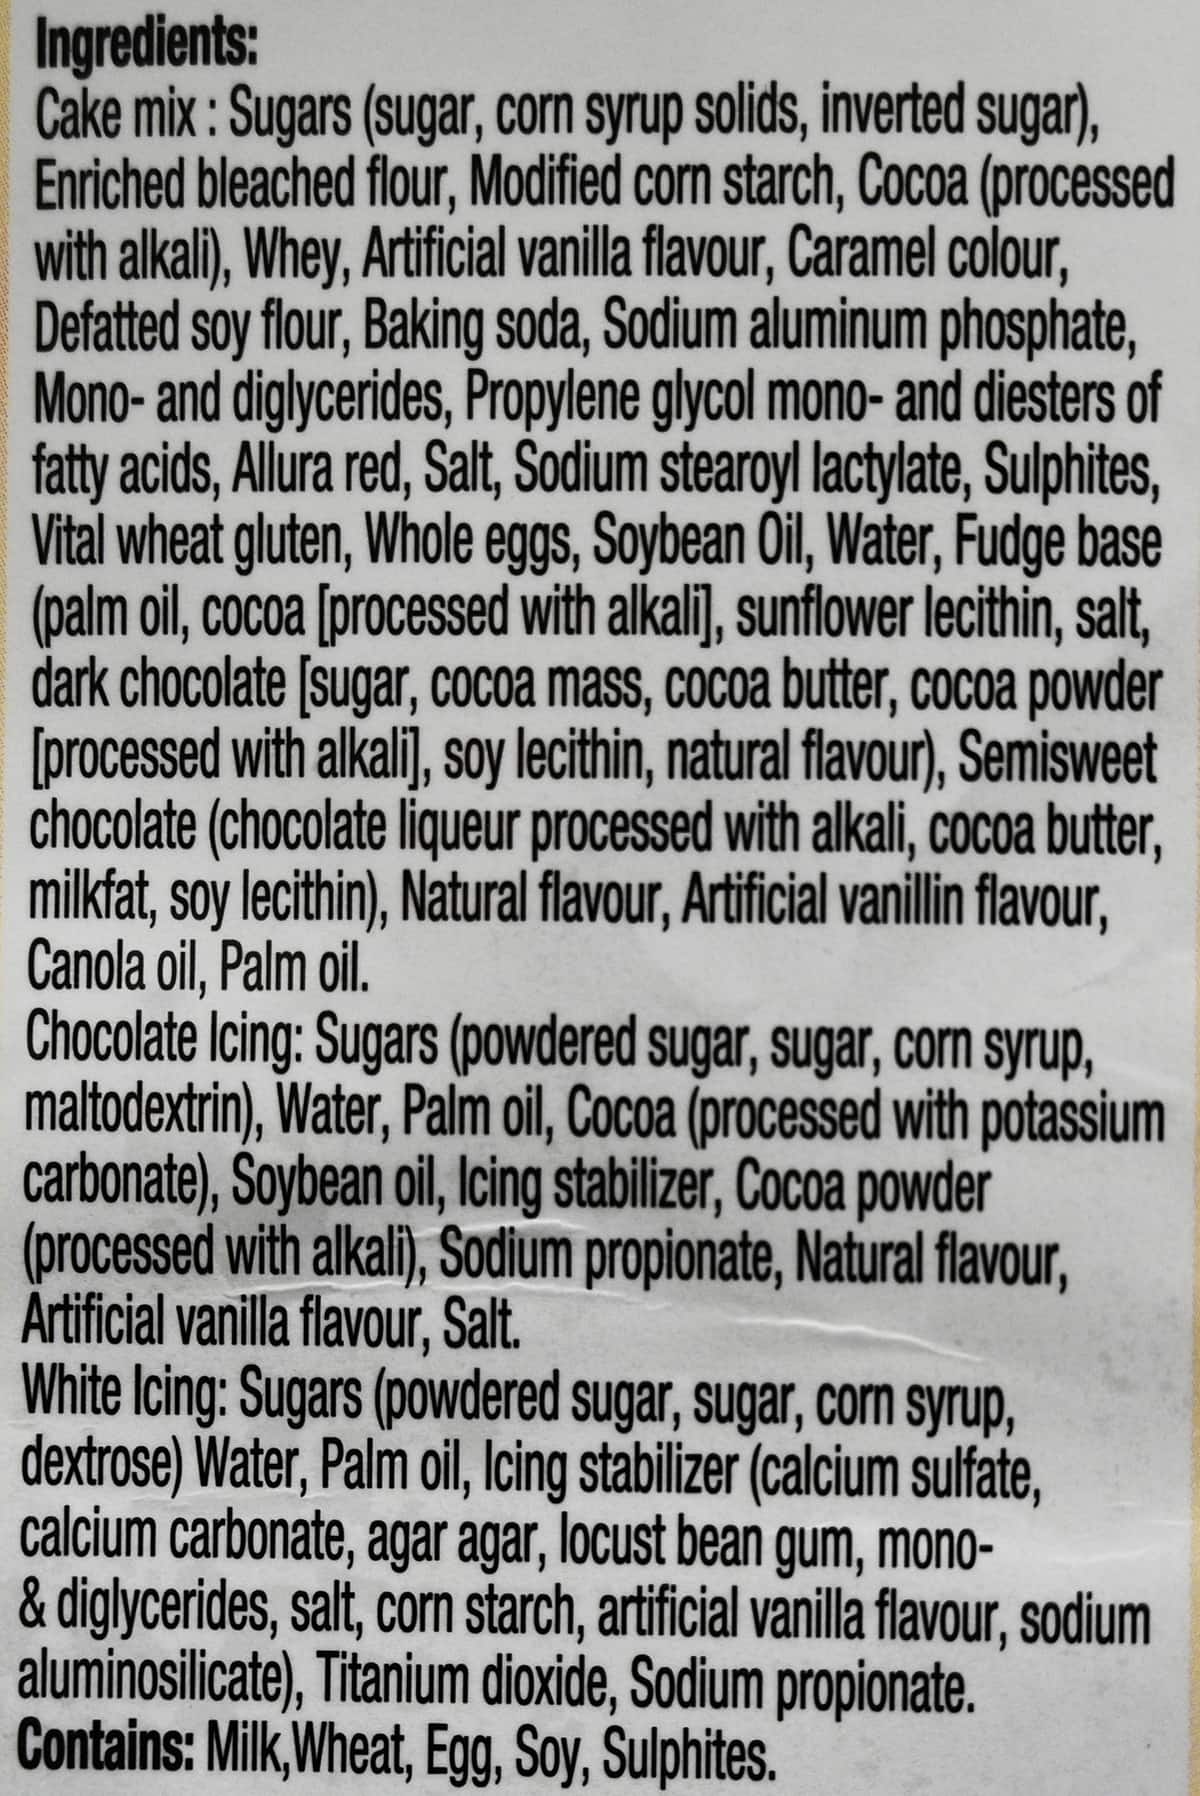 Image of the ingredients list for the tuxedo cake bites from the back of the package.